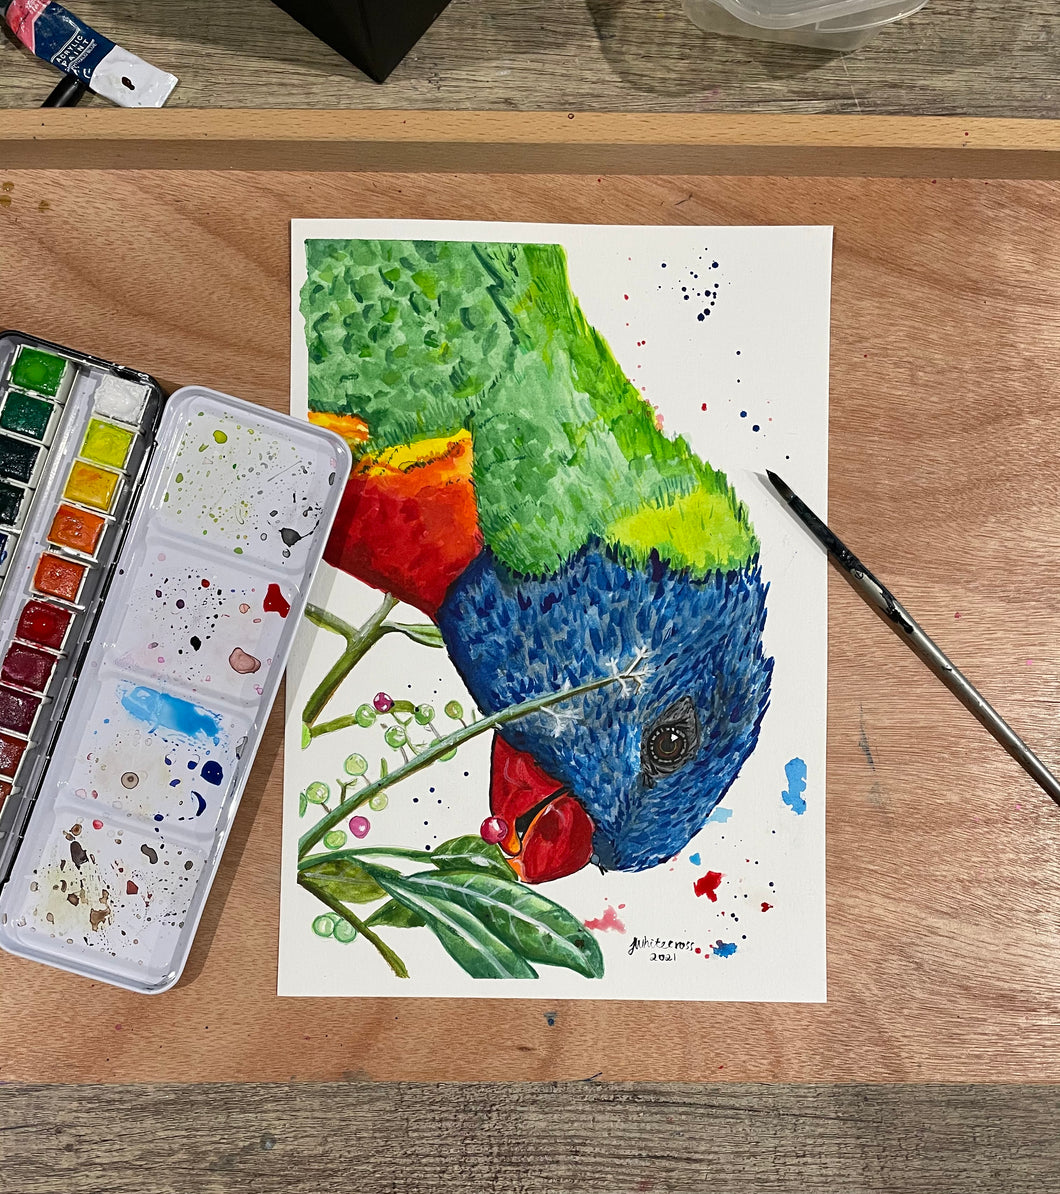 ‘Garry’ is an original watercolour painting. He is a native Australian Rainbow Lorikeet.       Lorikeets are known to be cheeky birds and ‘Garry’ definitely demonstrates this in his expression. The use of bright colours makes this a beautiful statement piece. It was painted to create happiness when you see it. Who doesn’t love a cheeky little bird. 